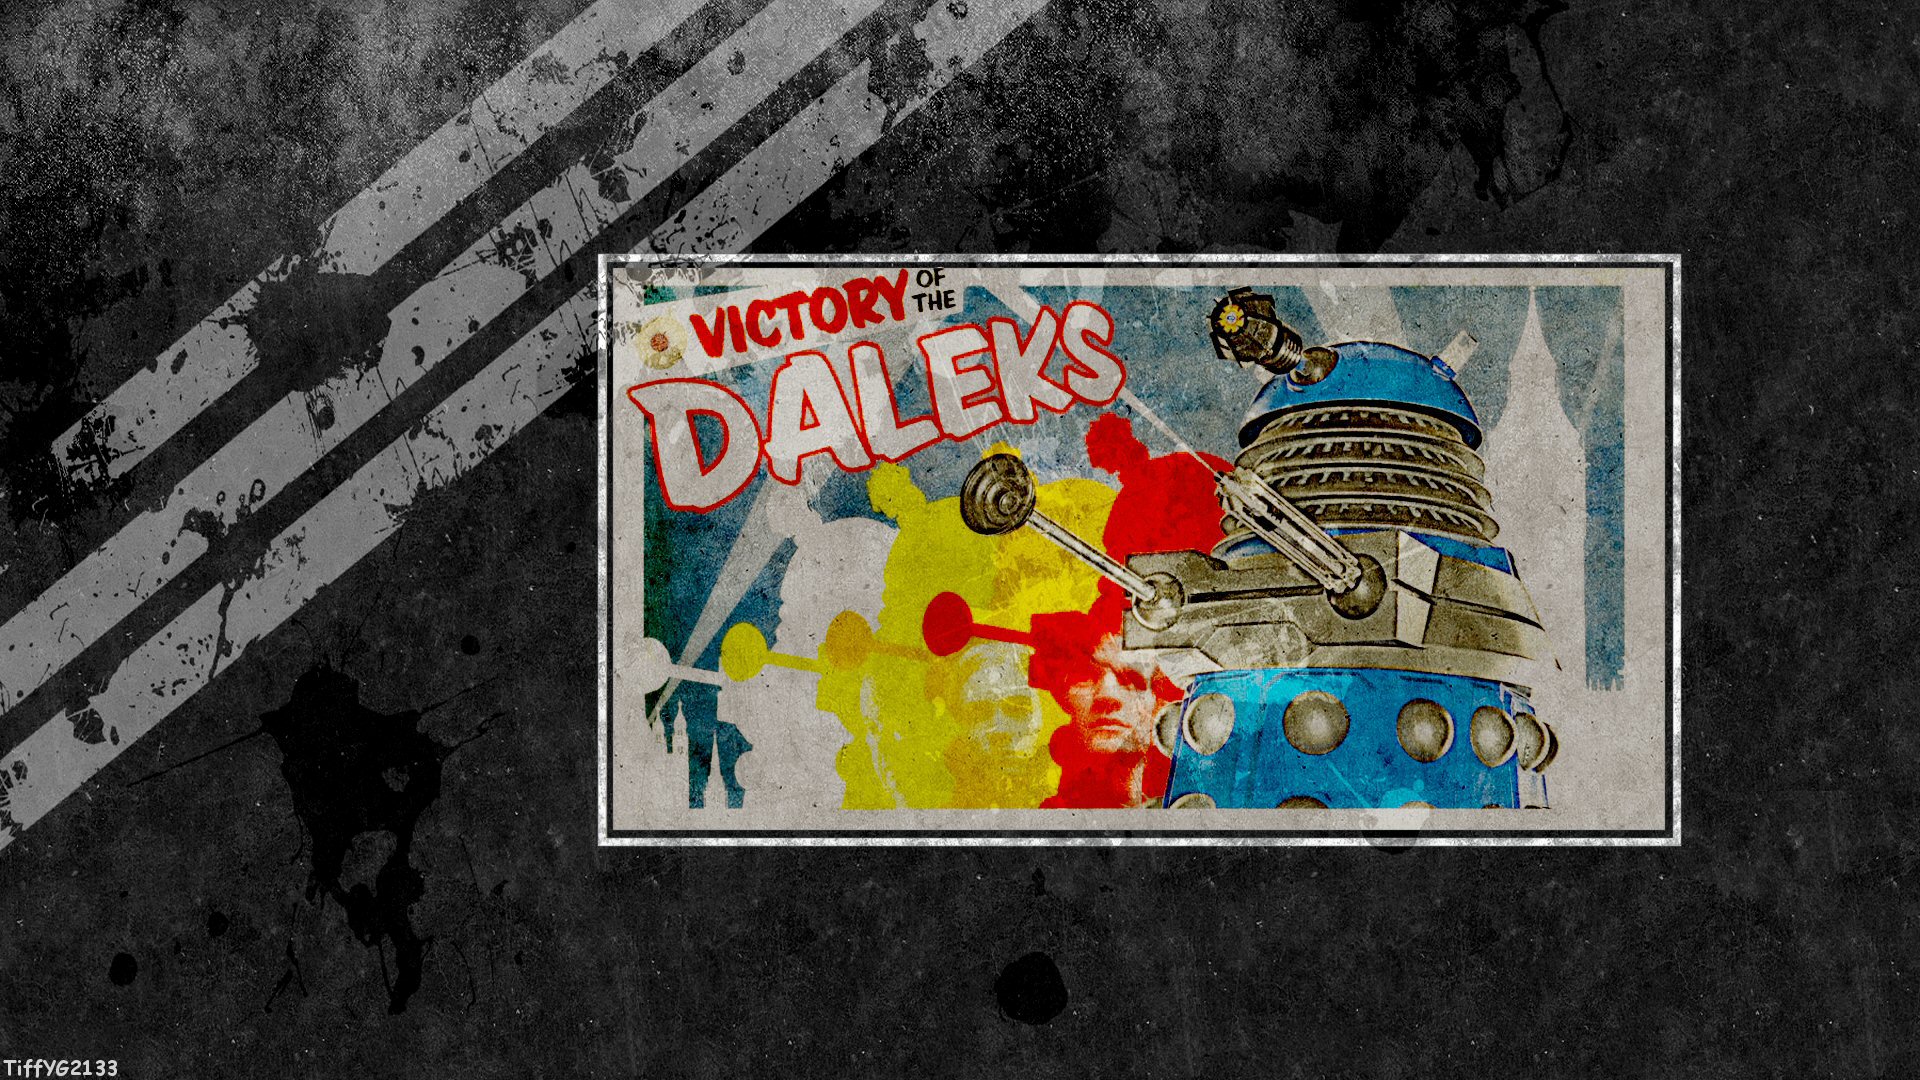 Dalek Wallpaper To Victory Of The Daleks